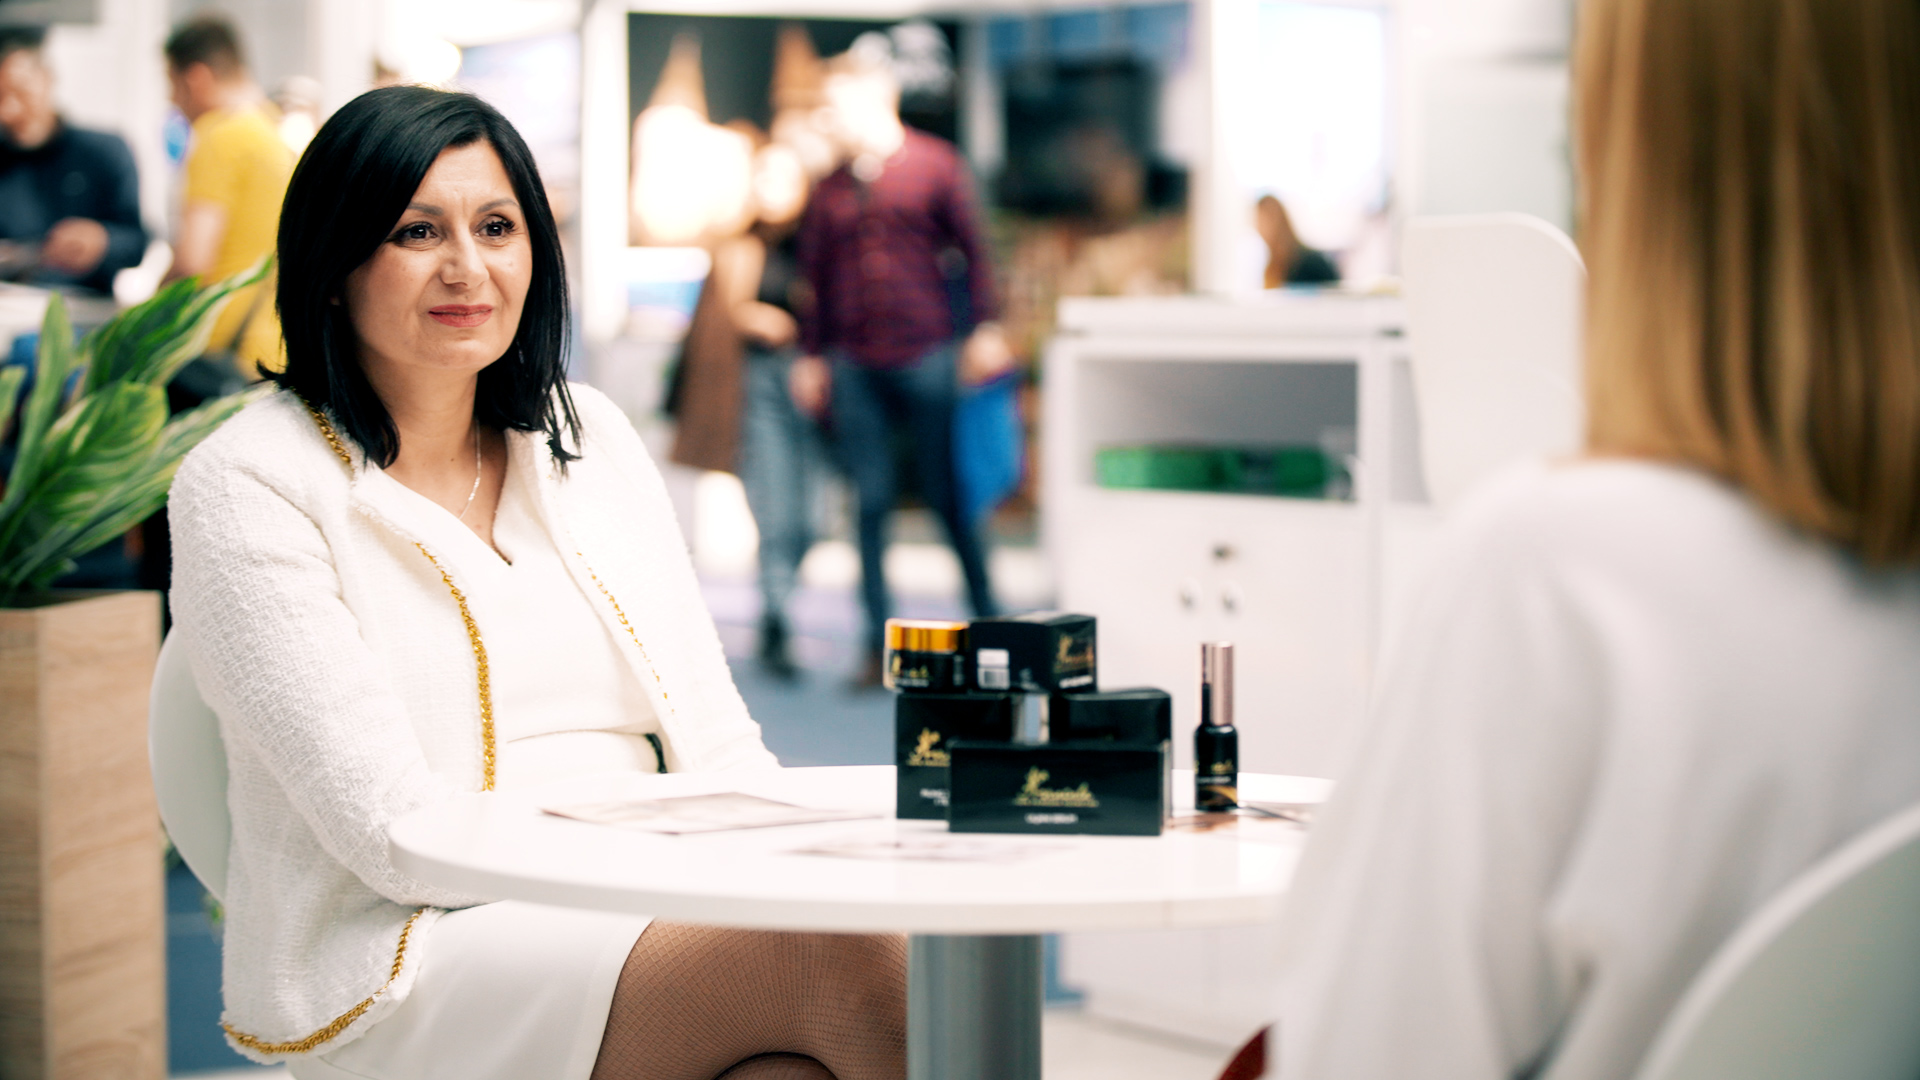 Miroslava Živanović, Roma entrepreneur, who started her own production of natural, organic products for skin and body care - Krasula 